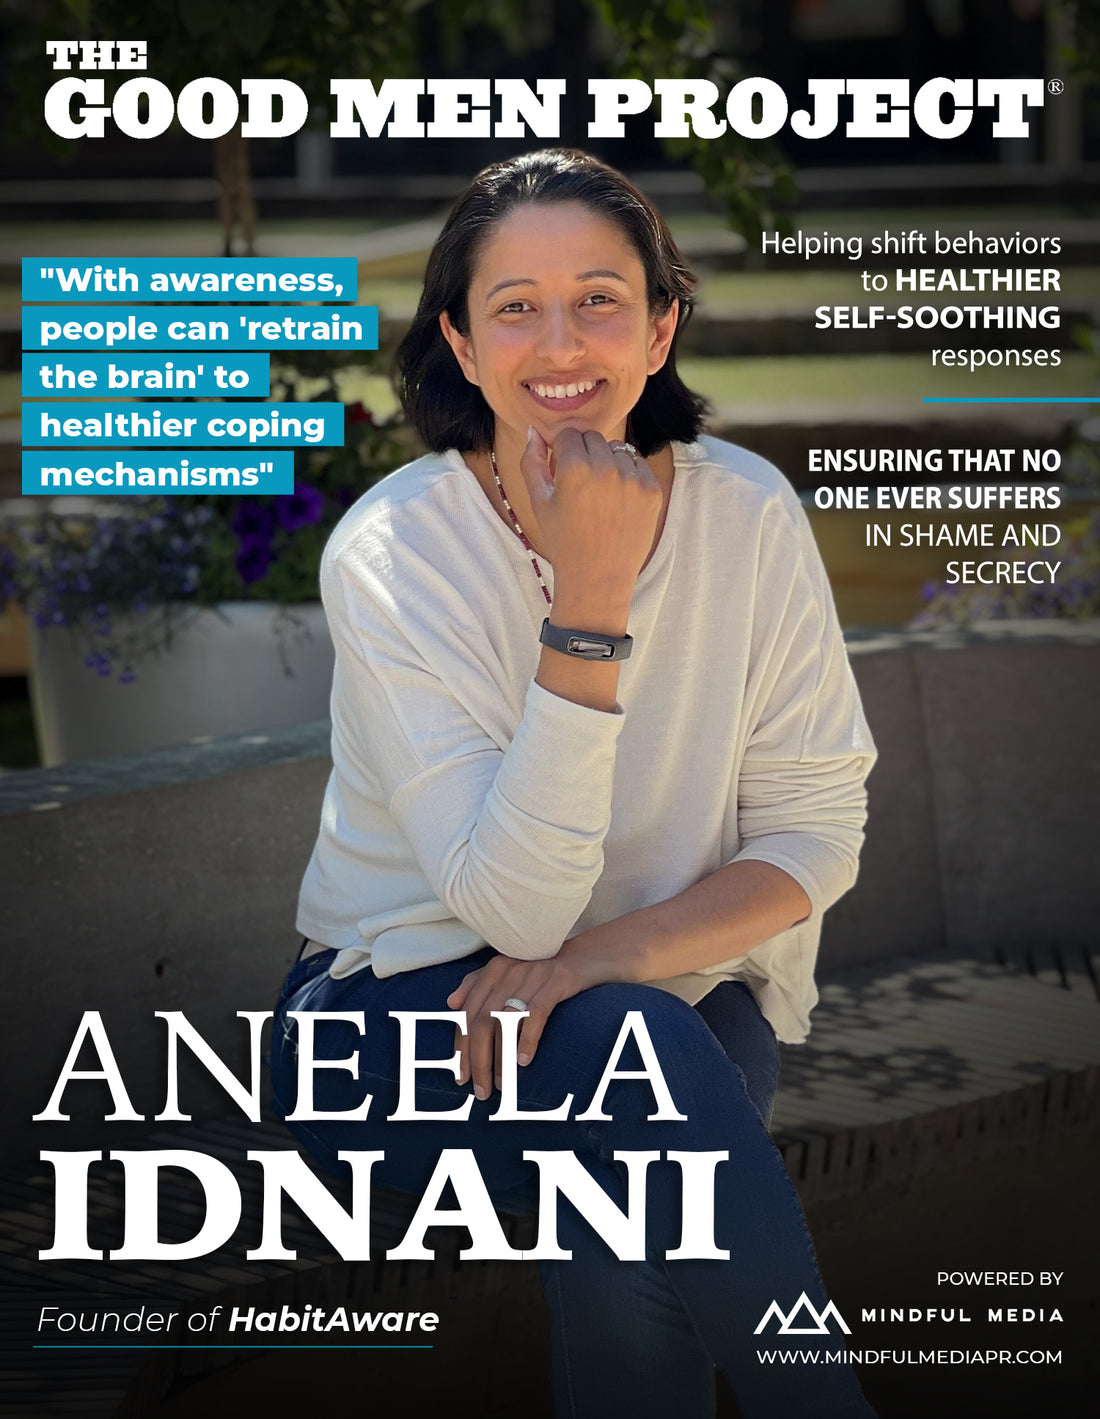 With Keen Awareness, Aneela Idnani Is Helping People Break The Cycle Of Body-Focused Repetitive Behaviors